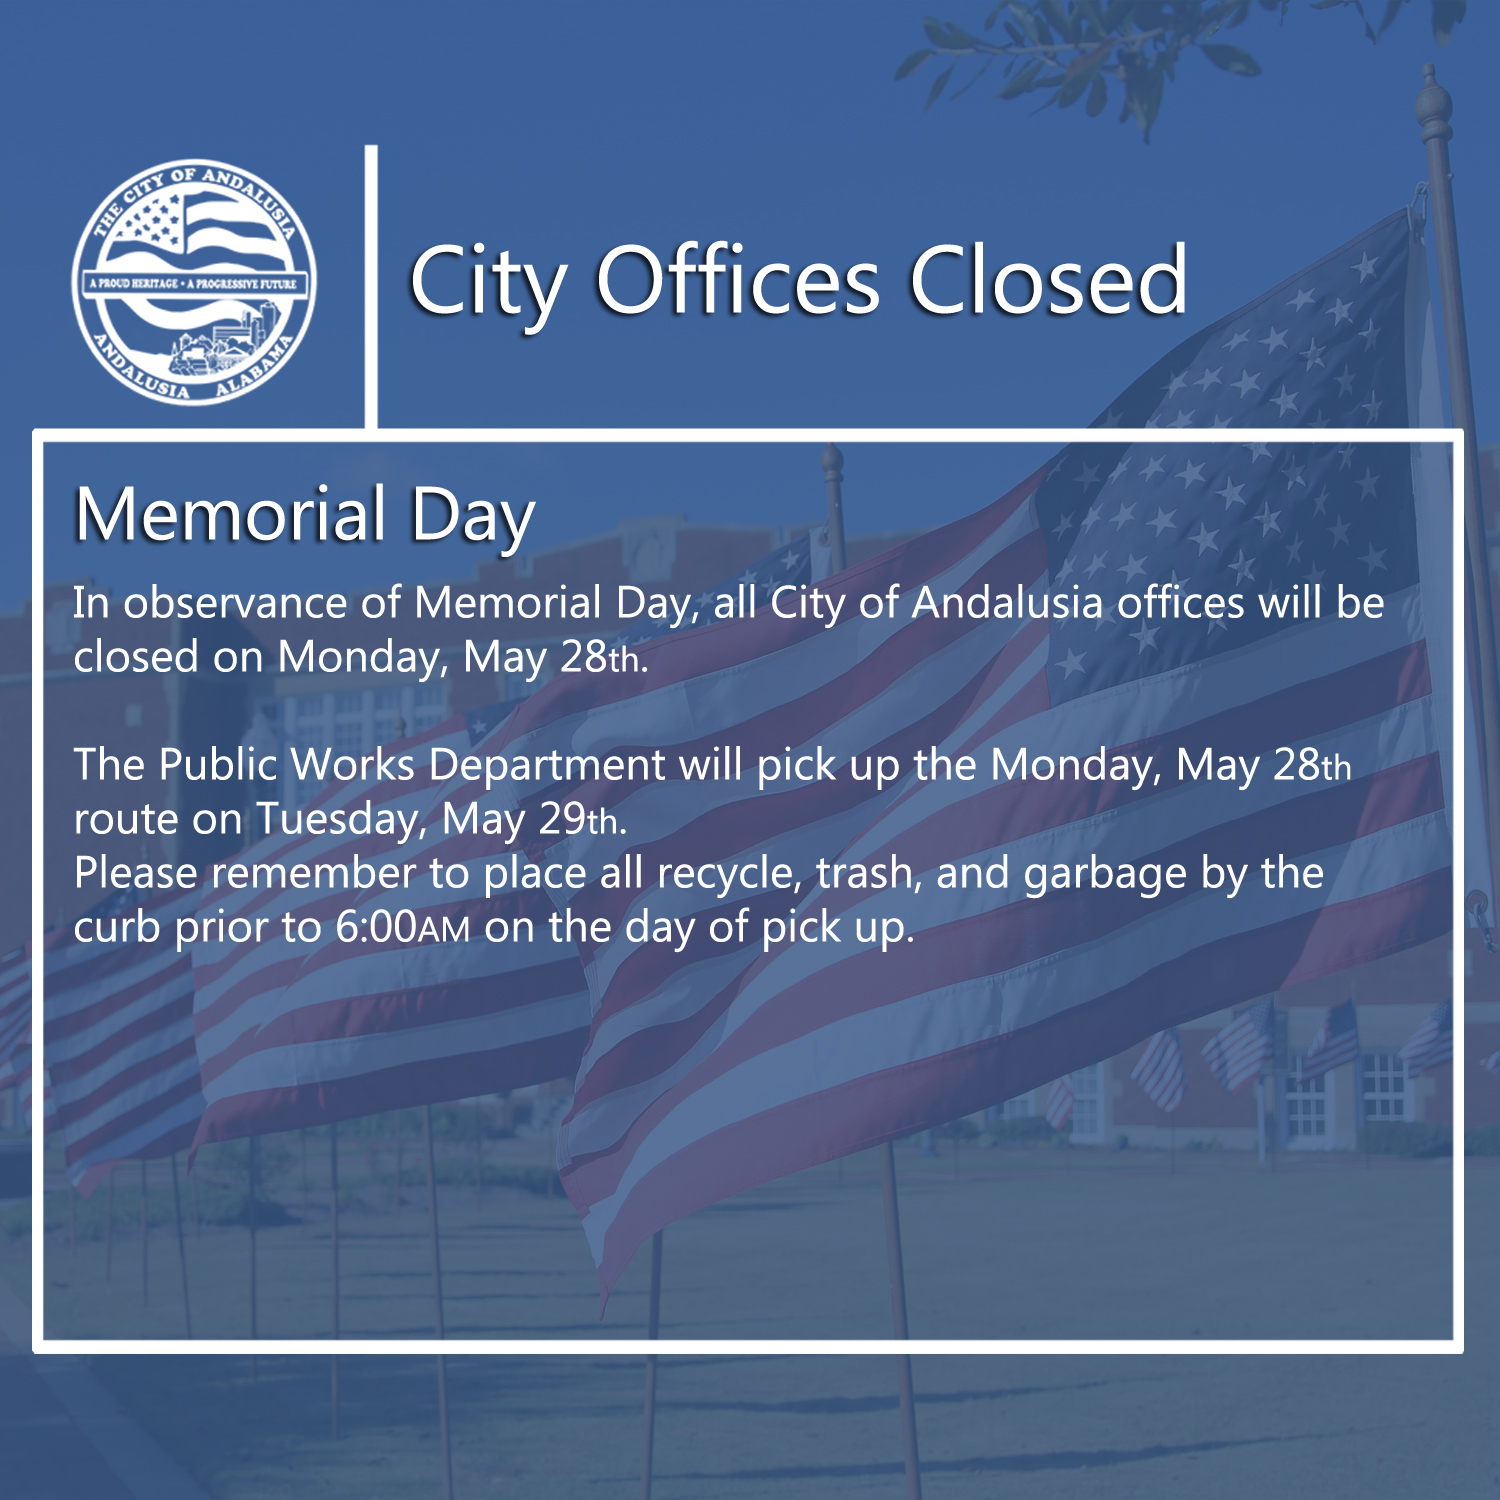 Facebook - City Offices Closed-Memorial Day.jpg